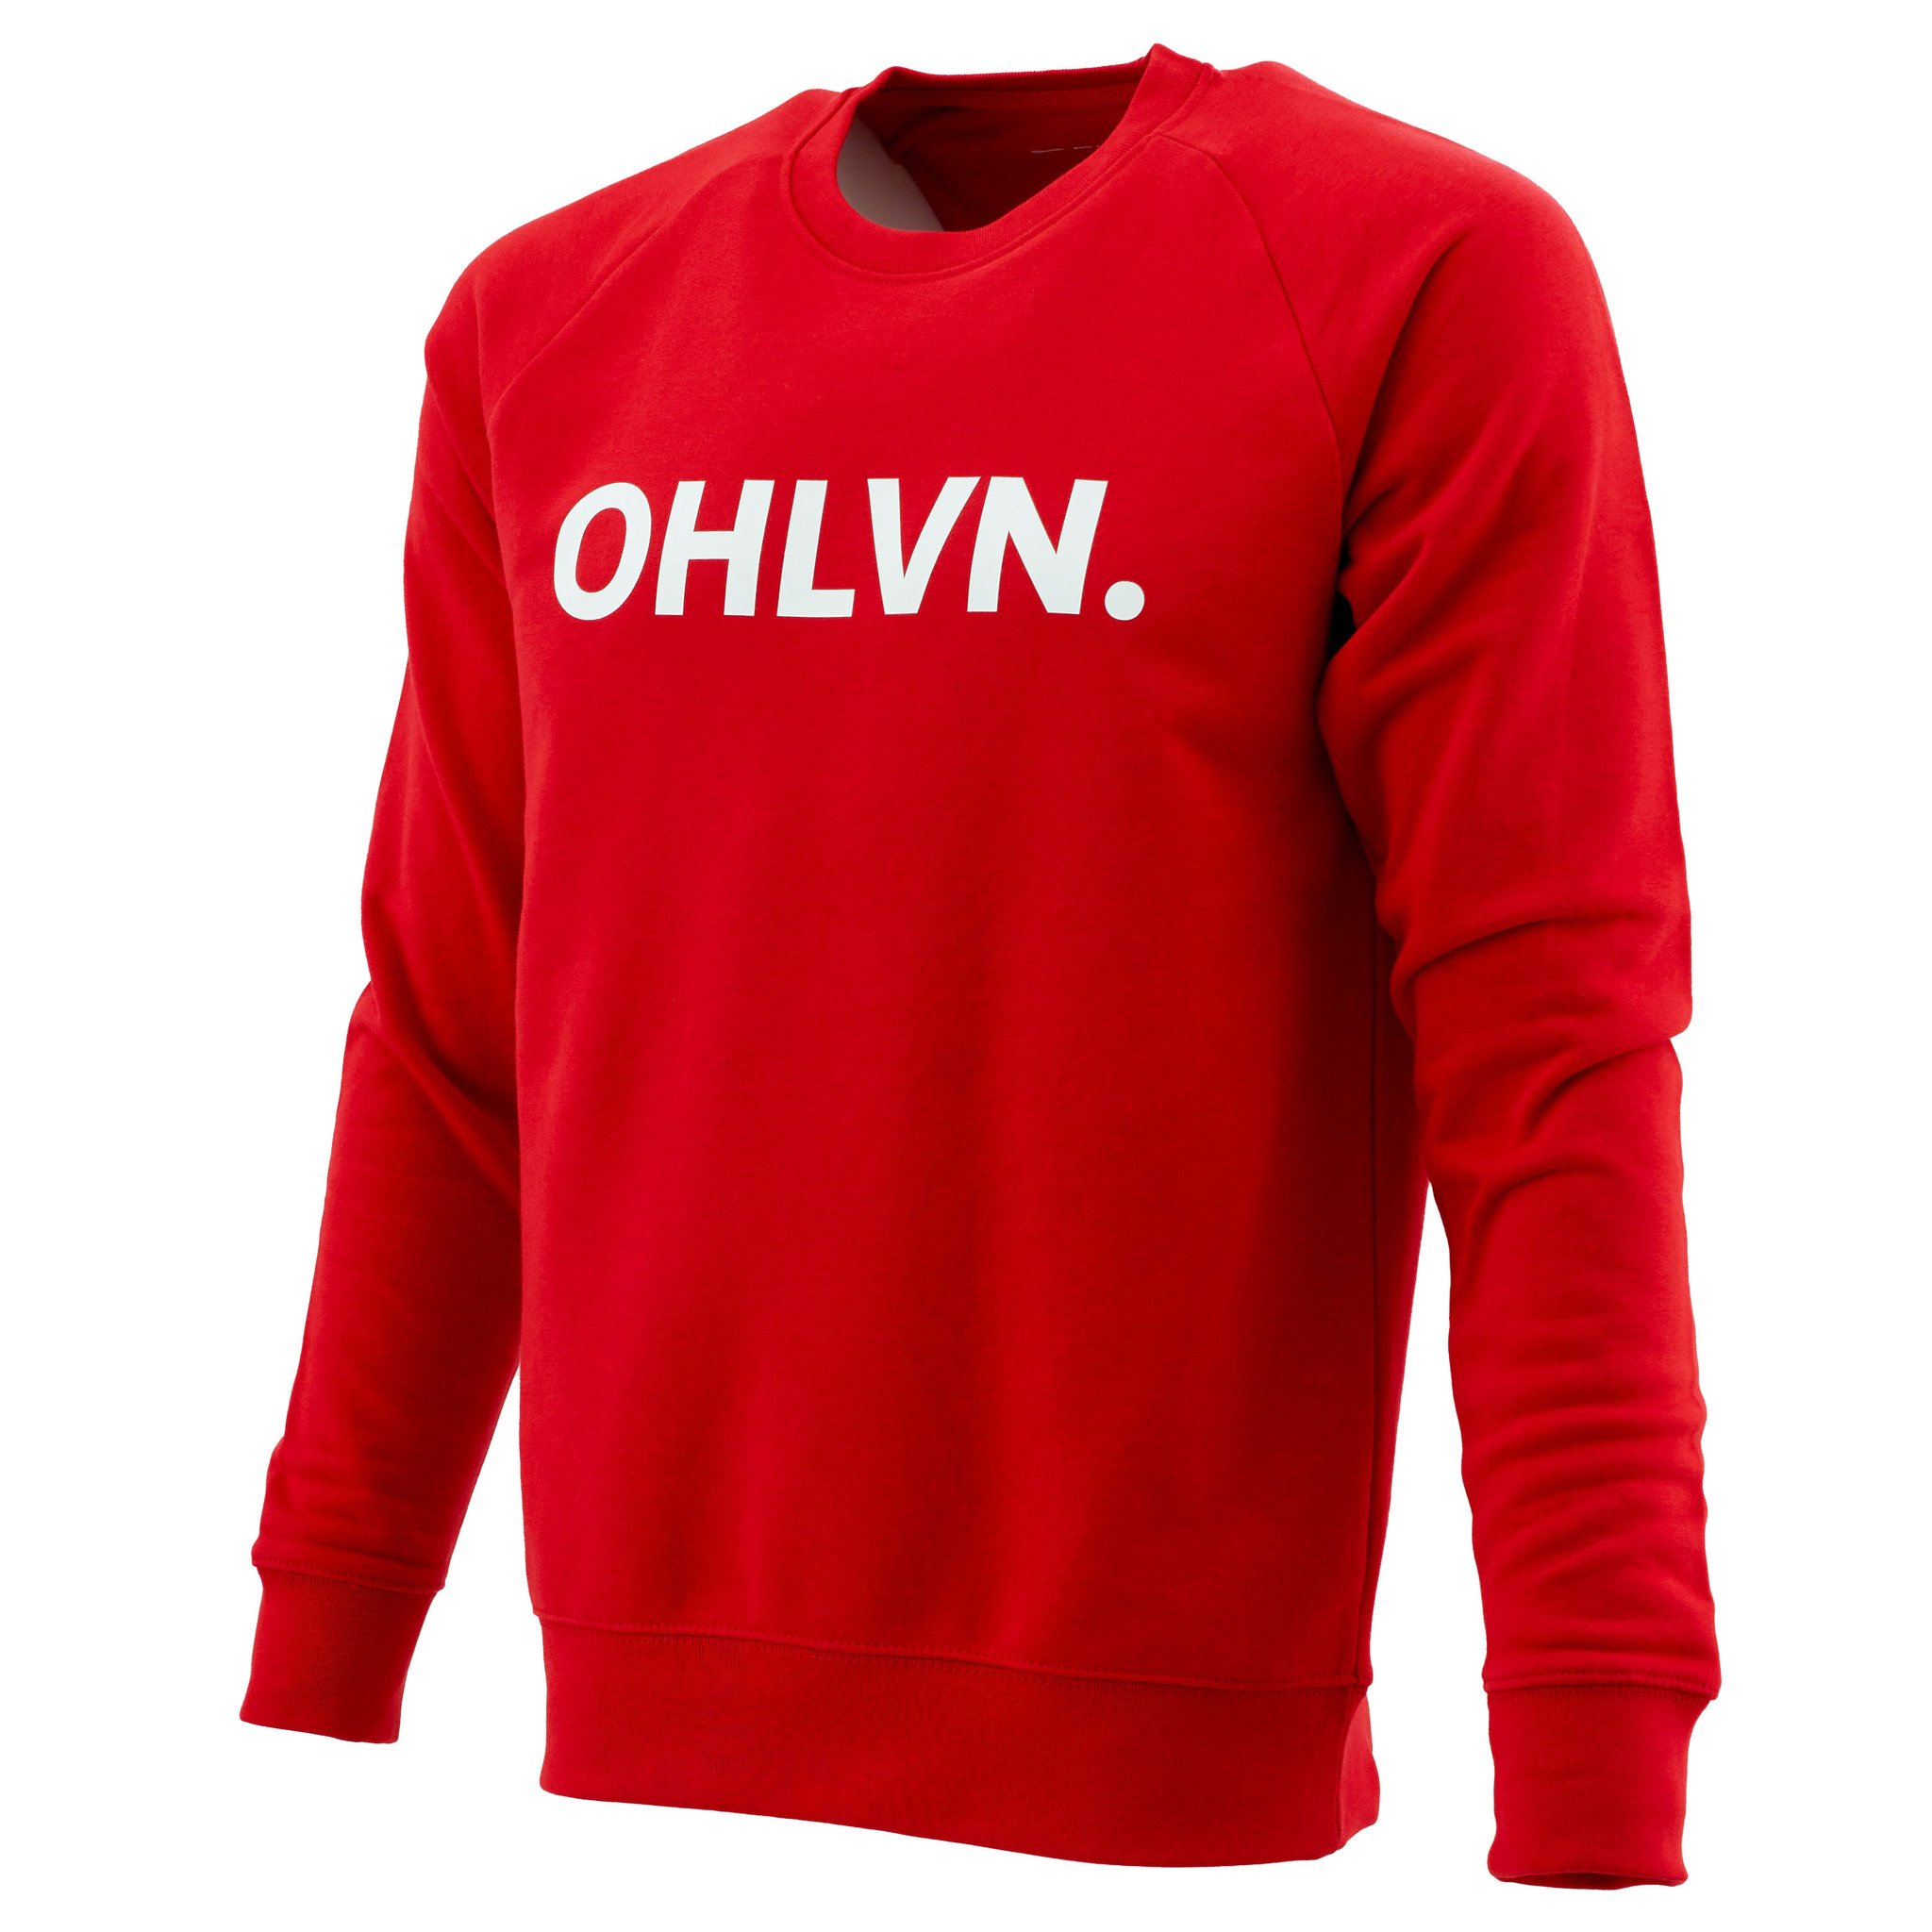 Topfanz Sweater rood OHLVN.